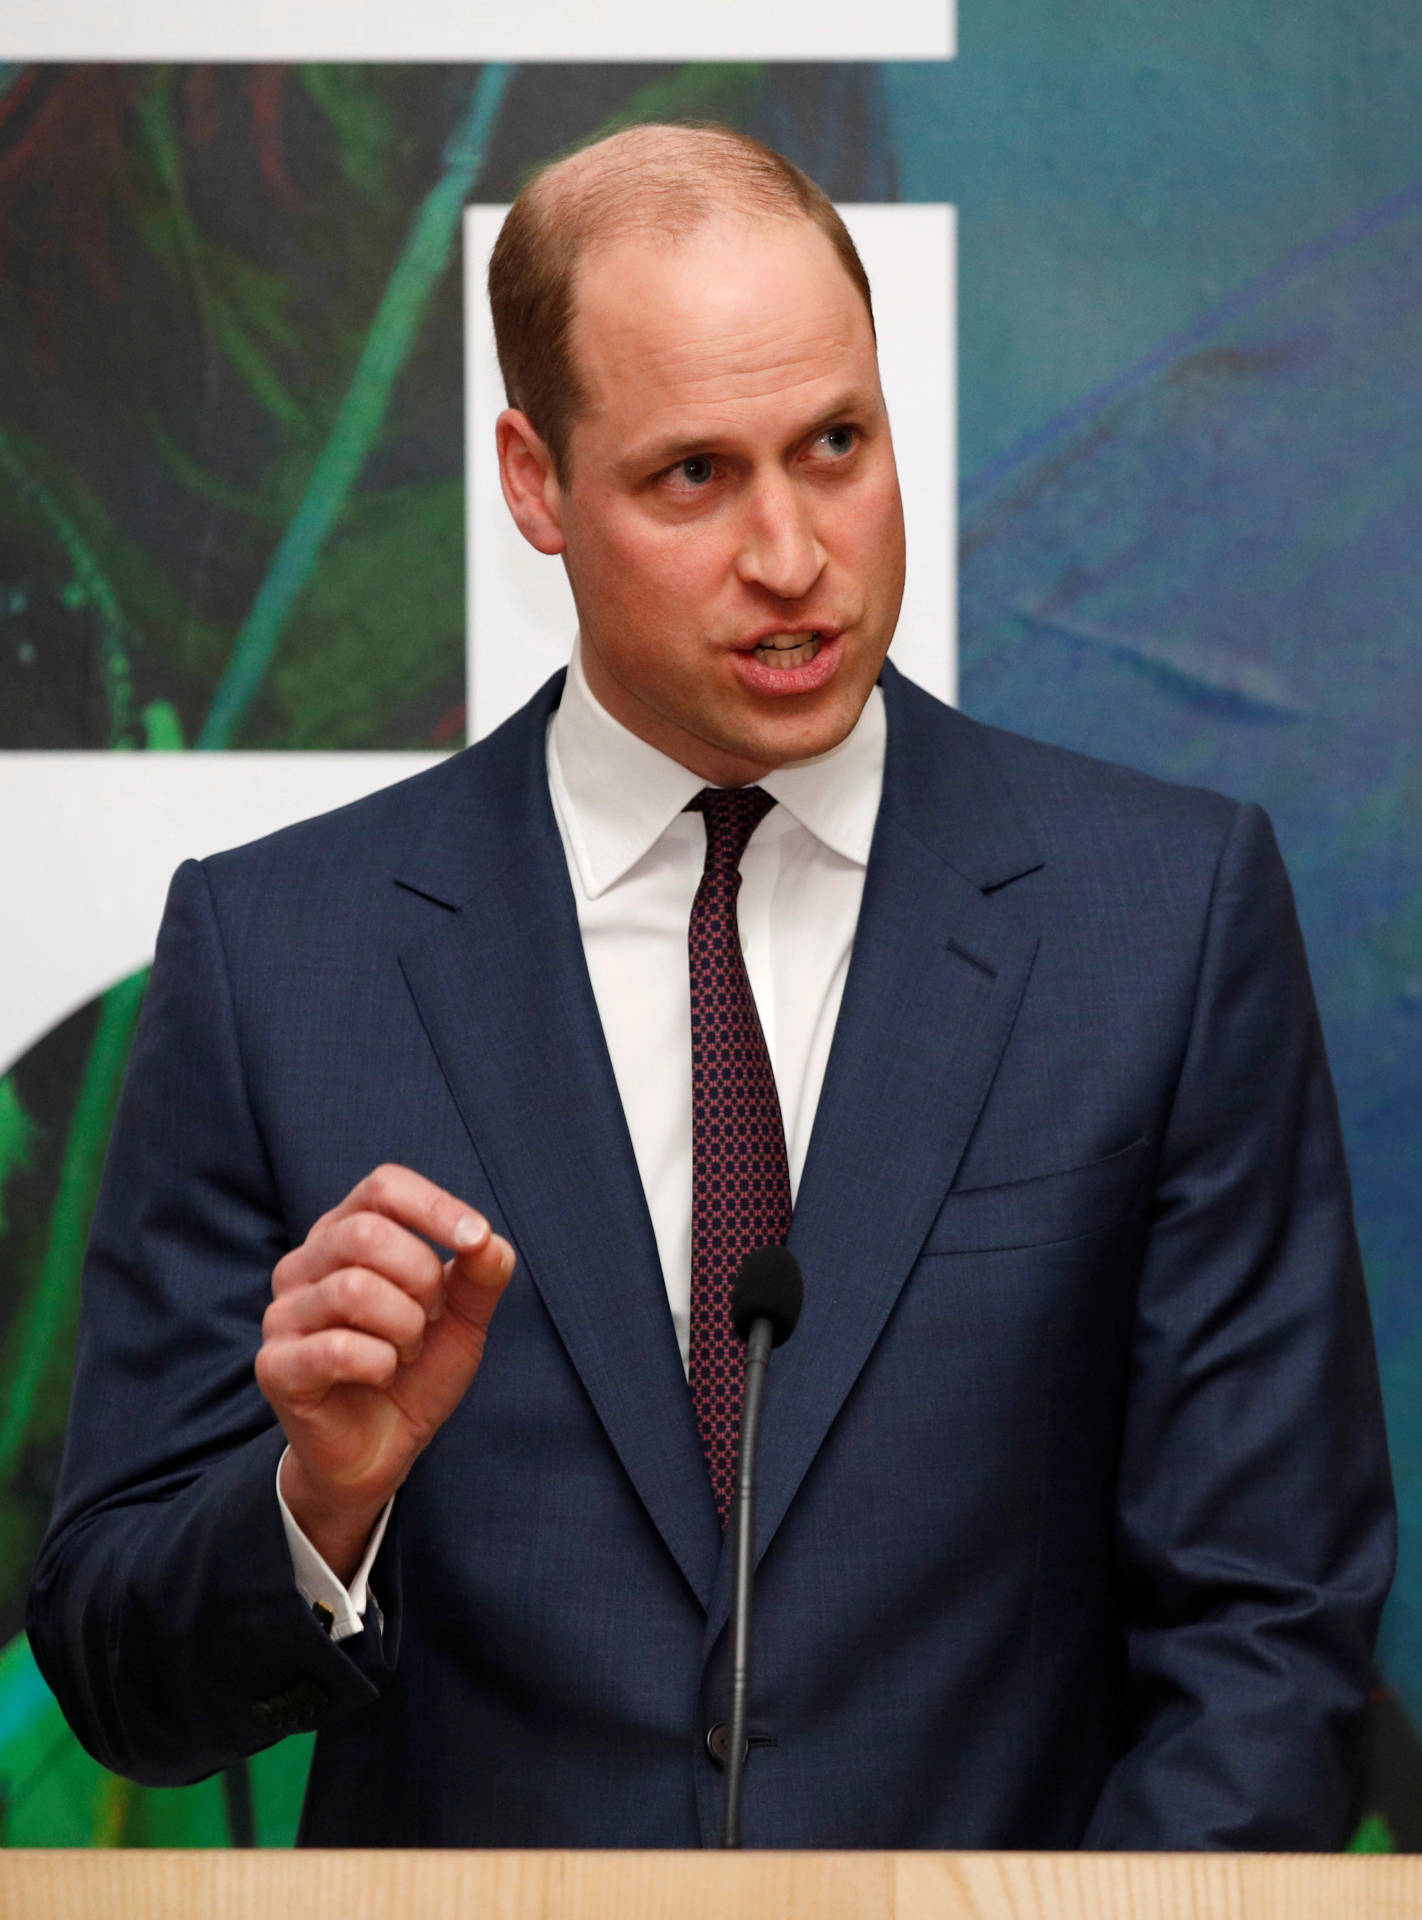 Prince William Speaking Into The Mic Wallpaper